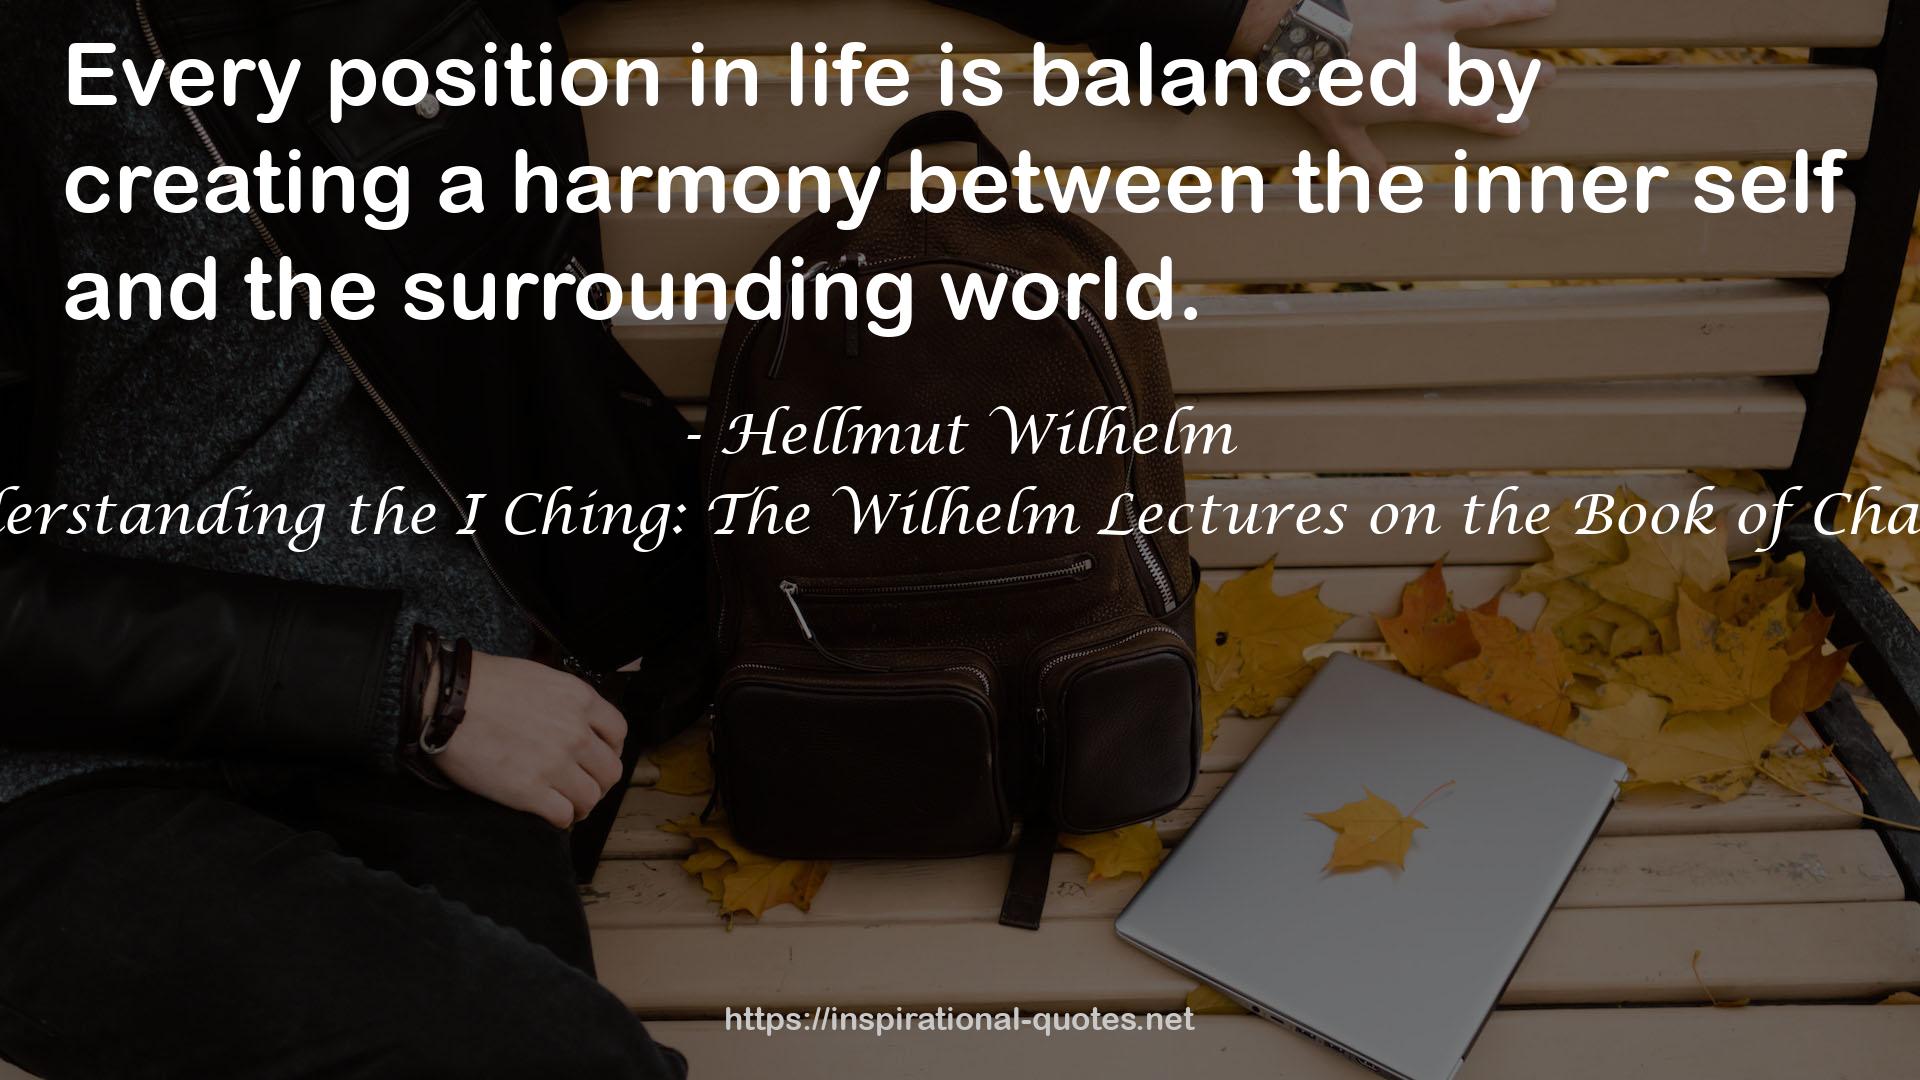 Understanding the I Ching: The Wilhelm Lectures on the Book of Changes QUOTES